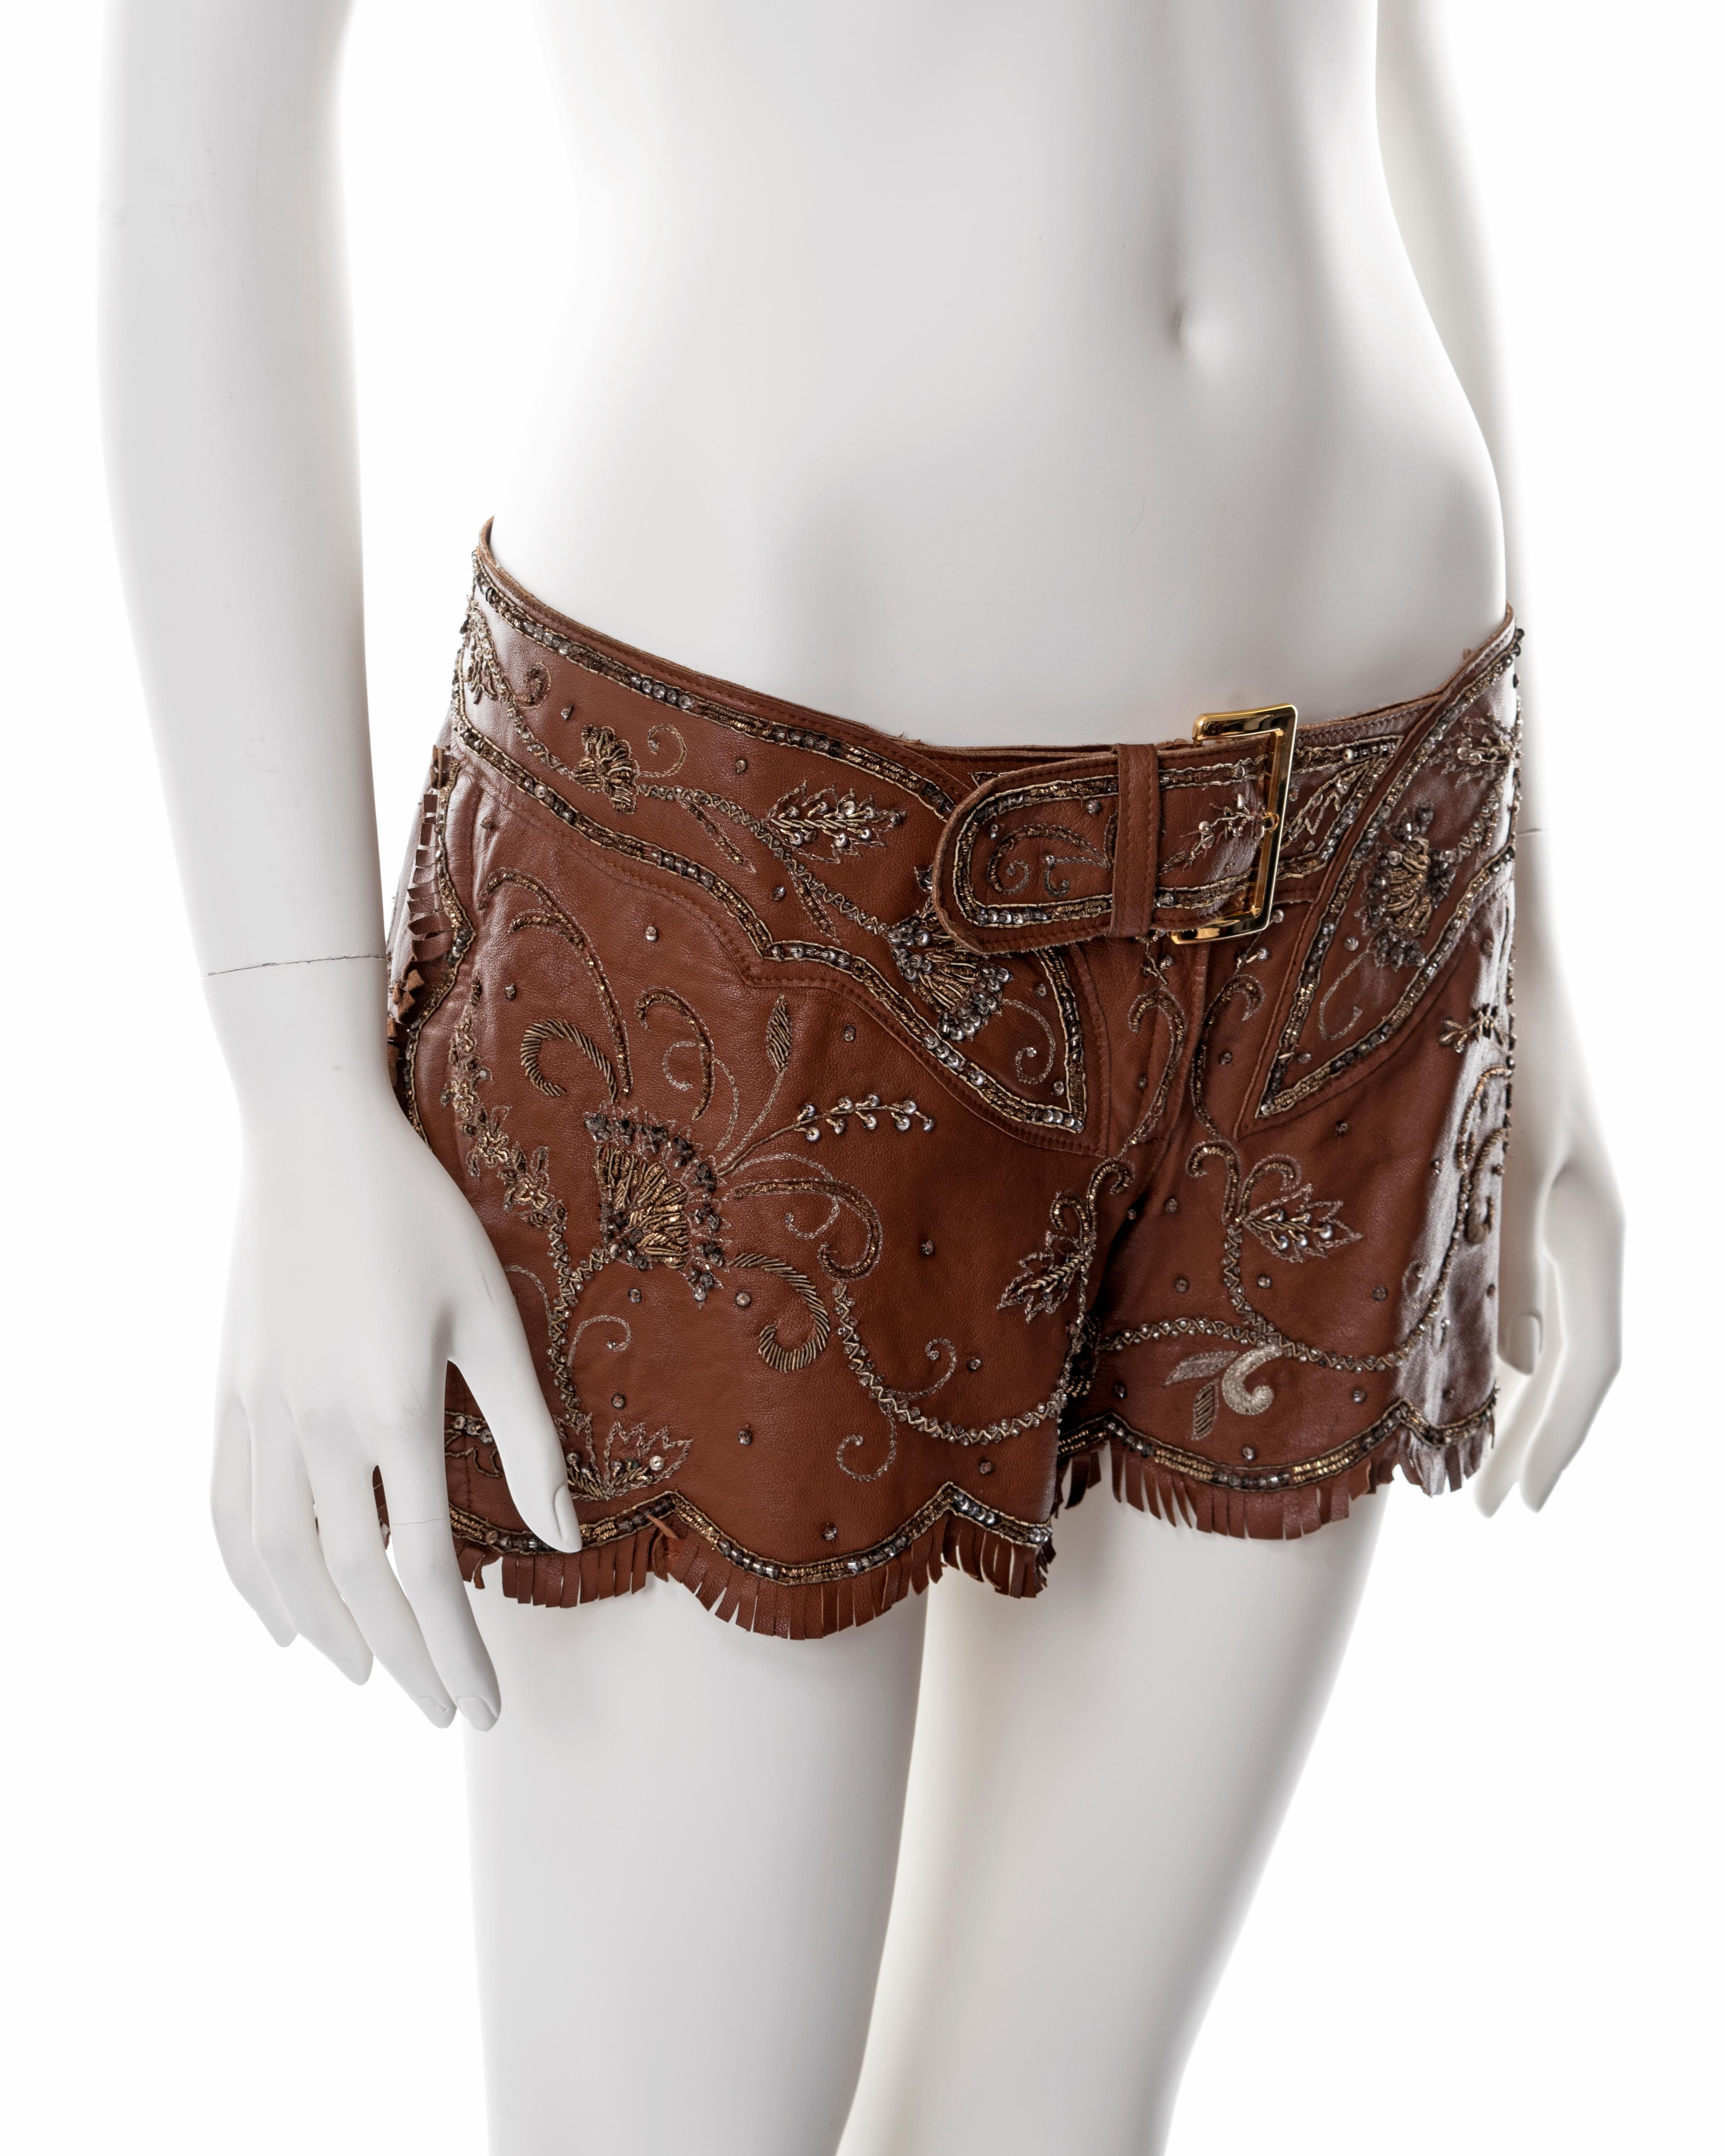 Dolce & Gabbana embroidered brown leather hot pants, ss 2001 2